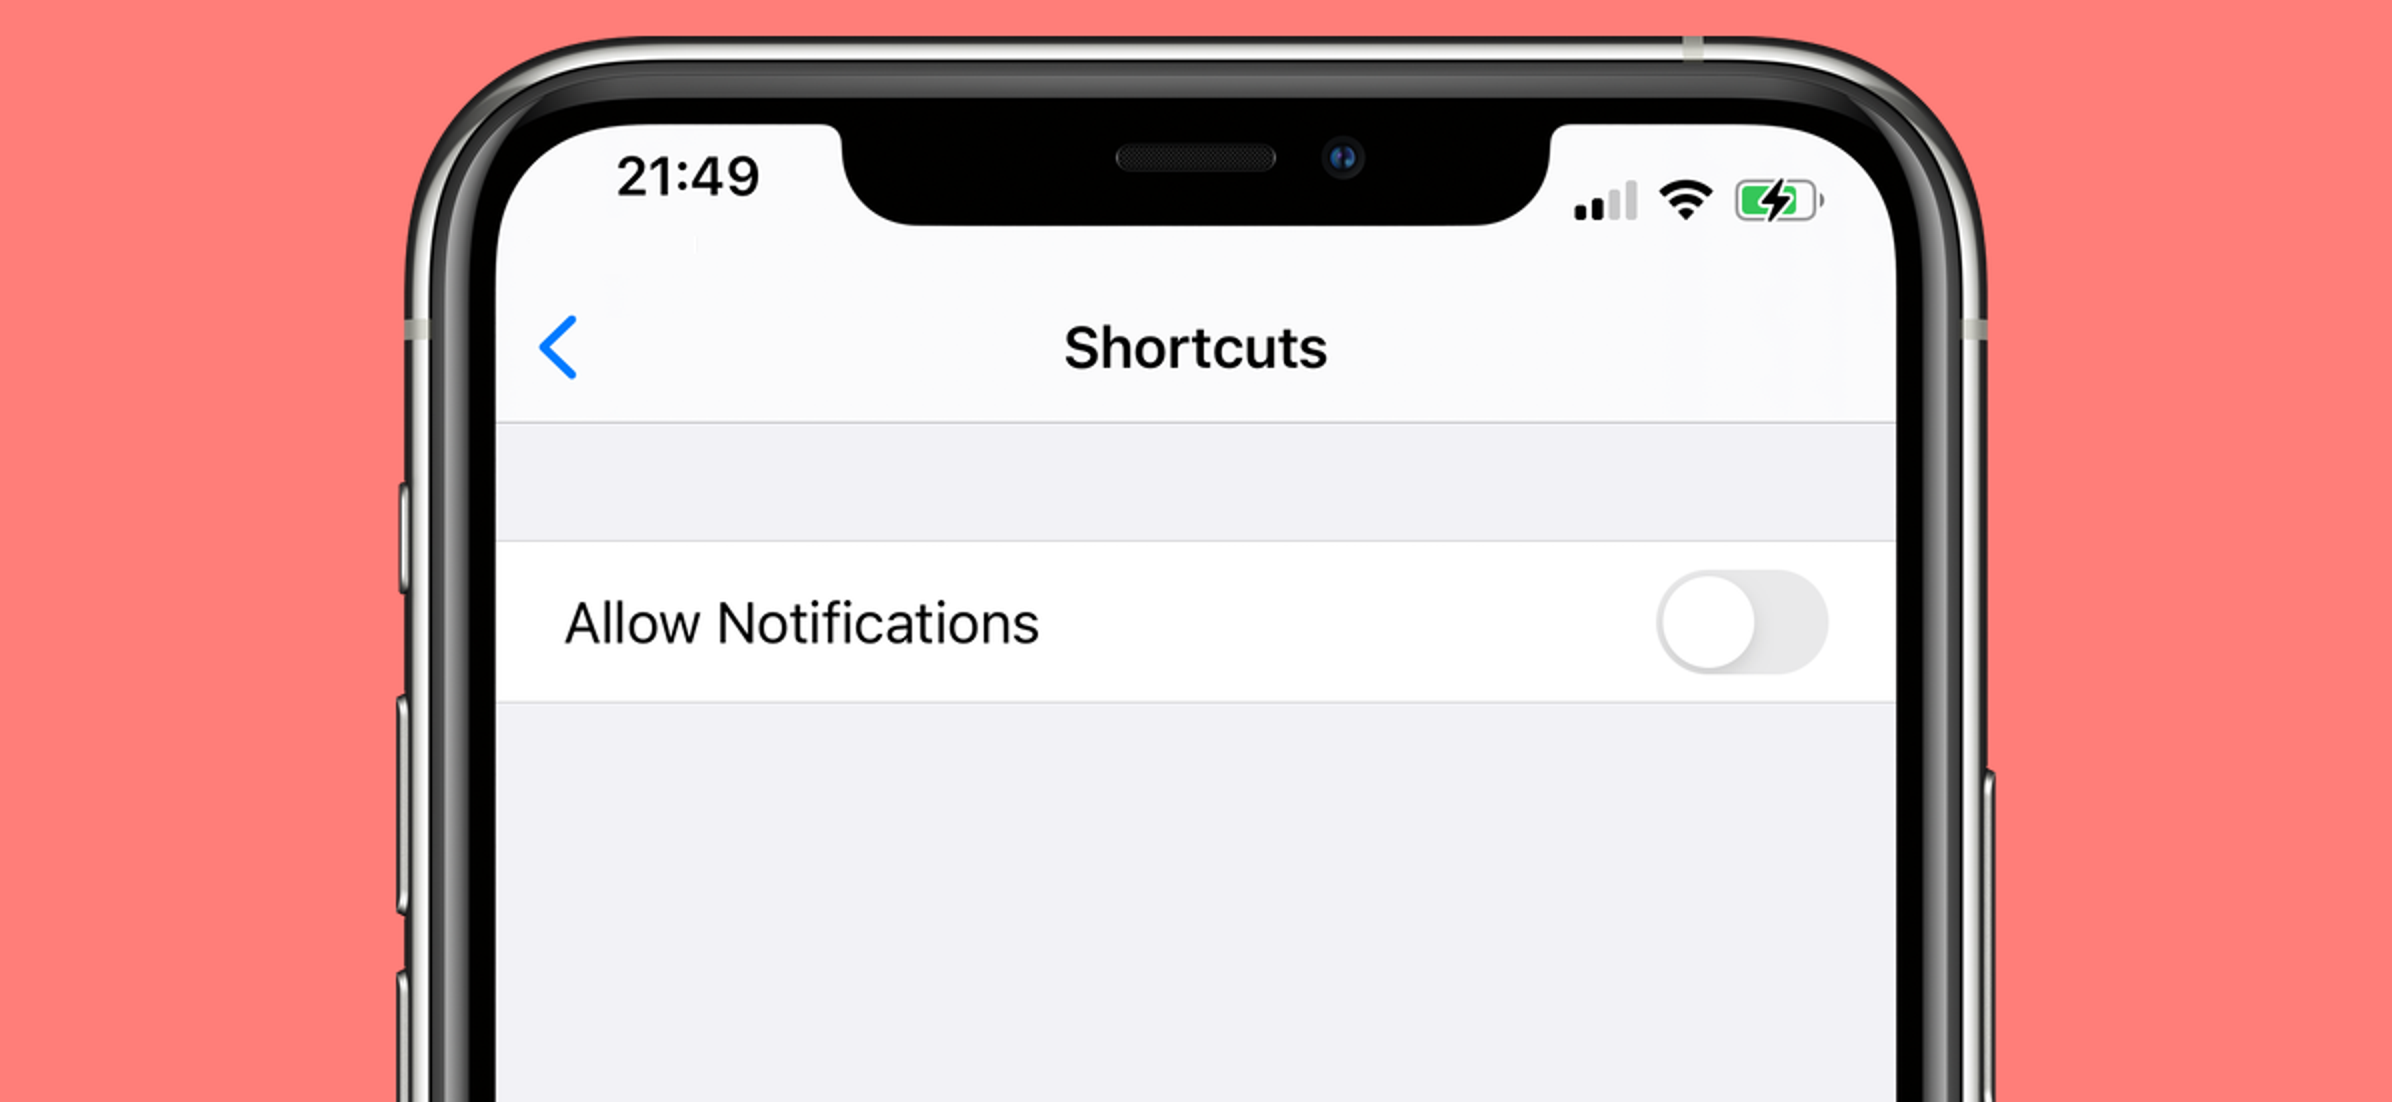 How to Disable Notifications for the Shortcuts App on iPhone